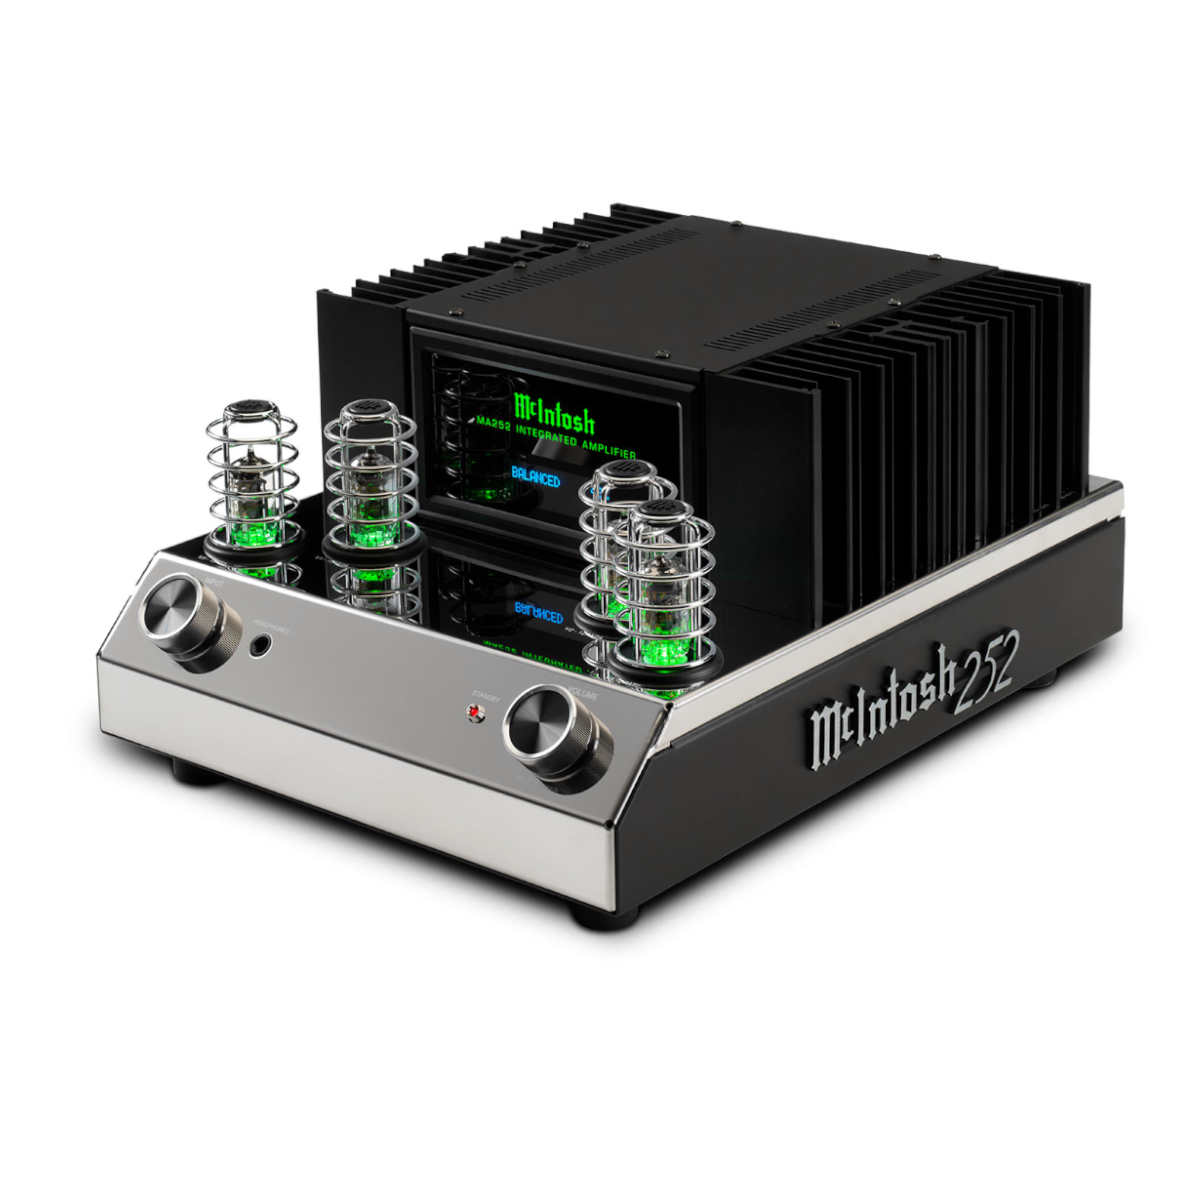 McIntosh MA252 2-Channel Hybrid Integrated Amplifier - Ooberpad India